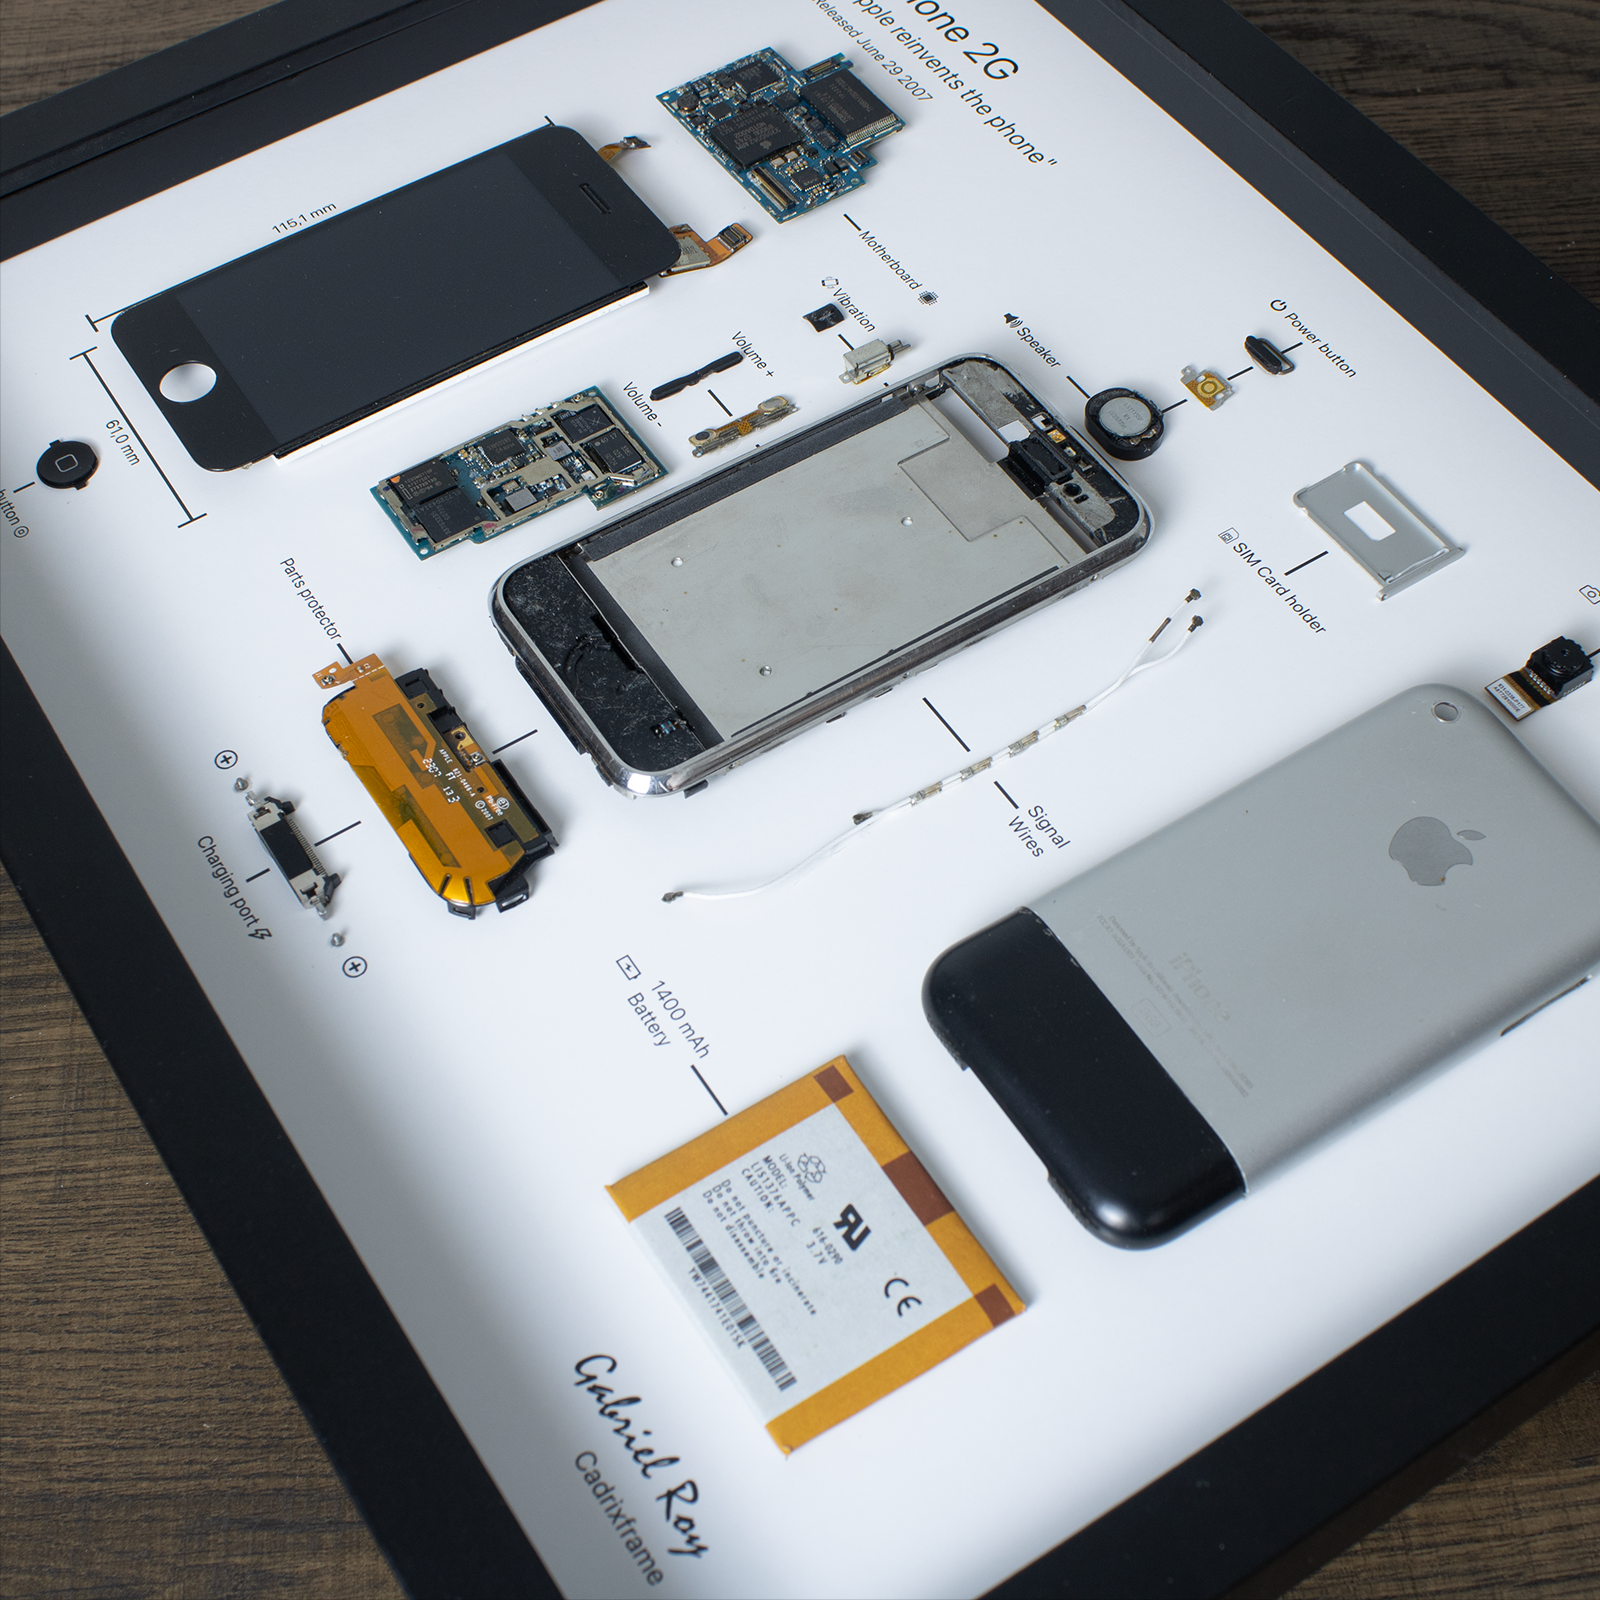 iPhone 2G disassembled in a frame